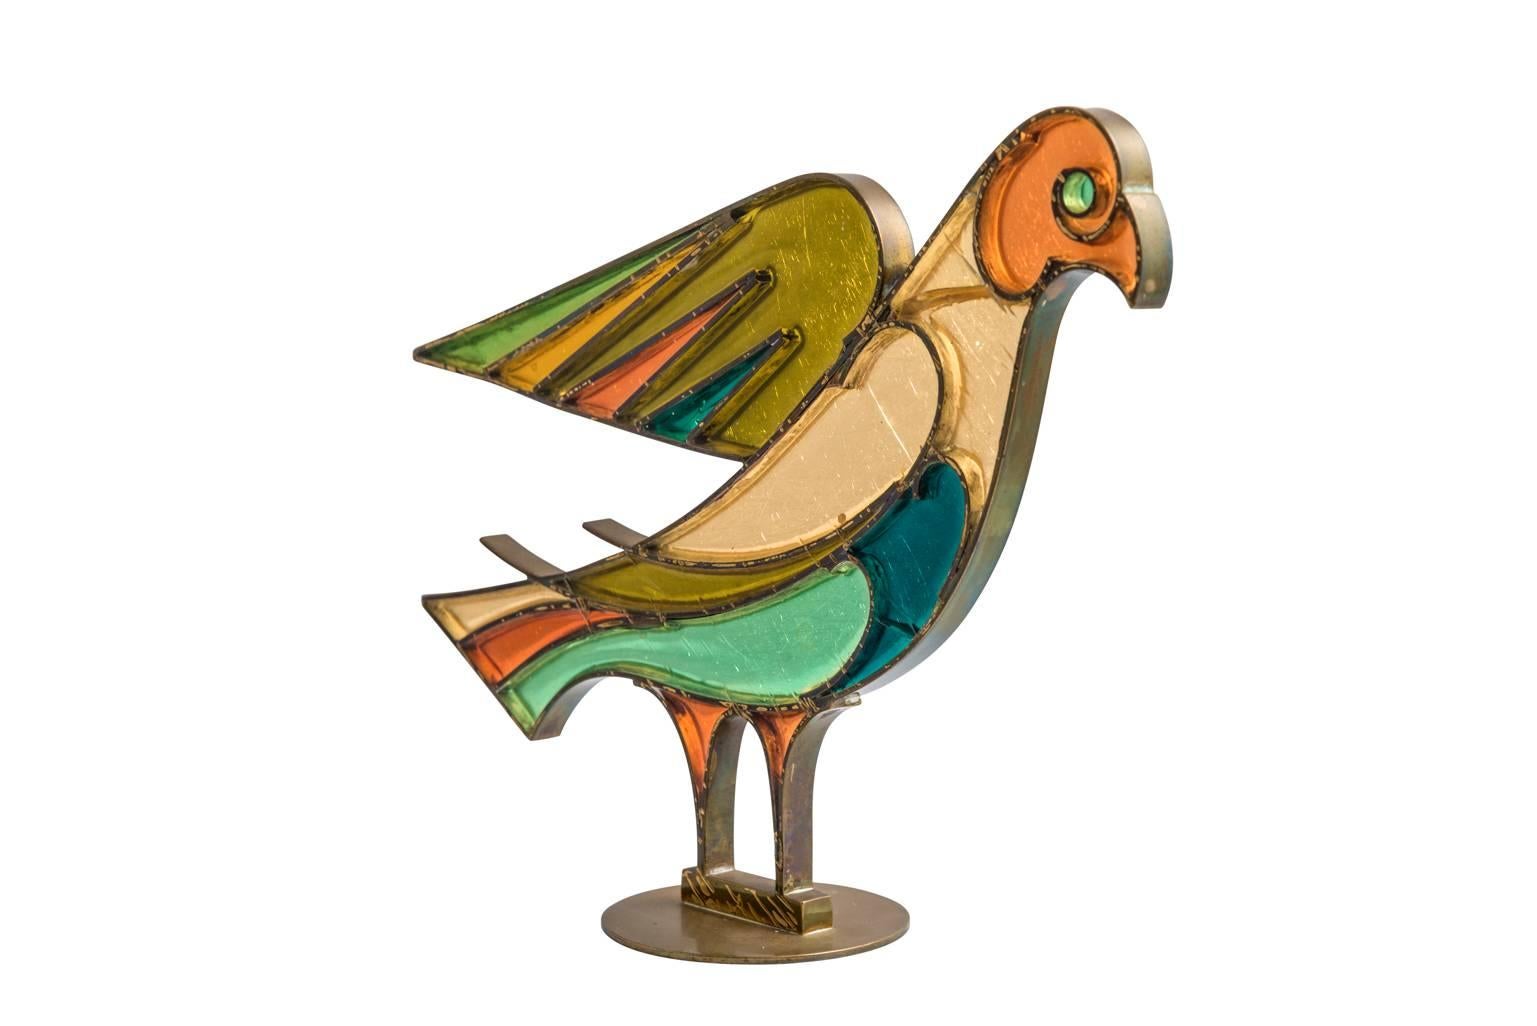 Dove Werkstatte Hagenauer Wien Austrian Mid-Century Brass Resin 1940s Art Deco

Franz Hagenauer liked to experiment with different materials. He took an enamel class at the Wiener-Kunstgewerbeschule (school of arts and crafts) and was fond of